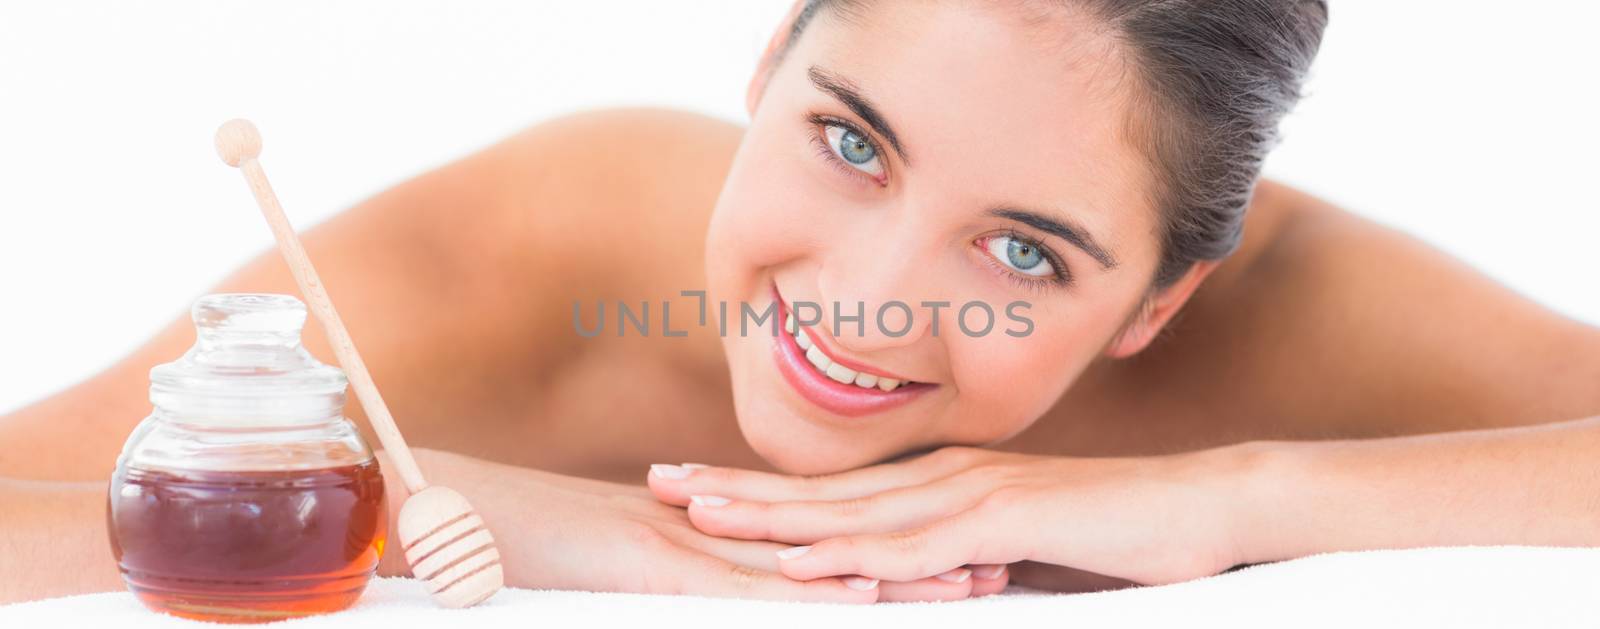 Portrait smiling pretty brunette on massage table with white backgroung